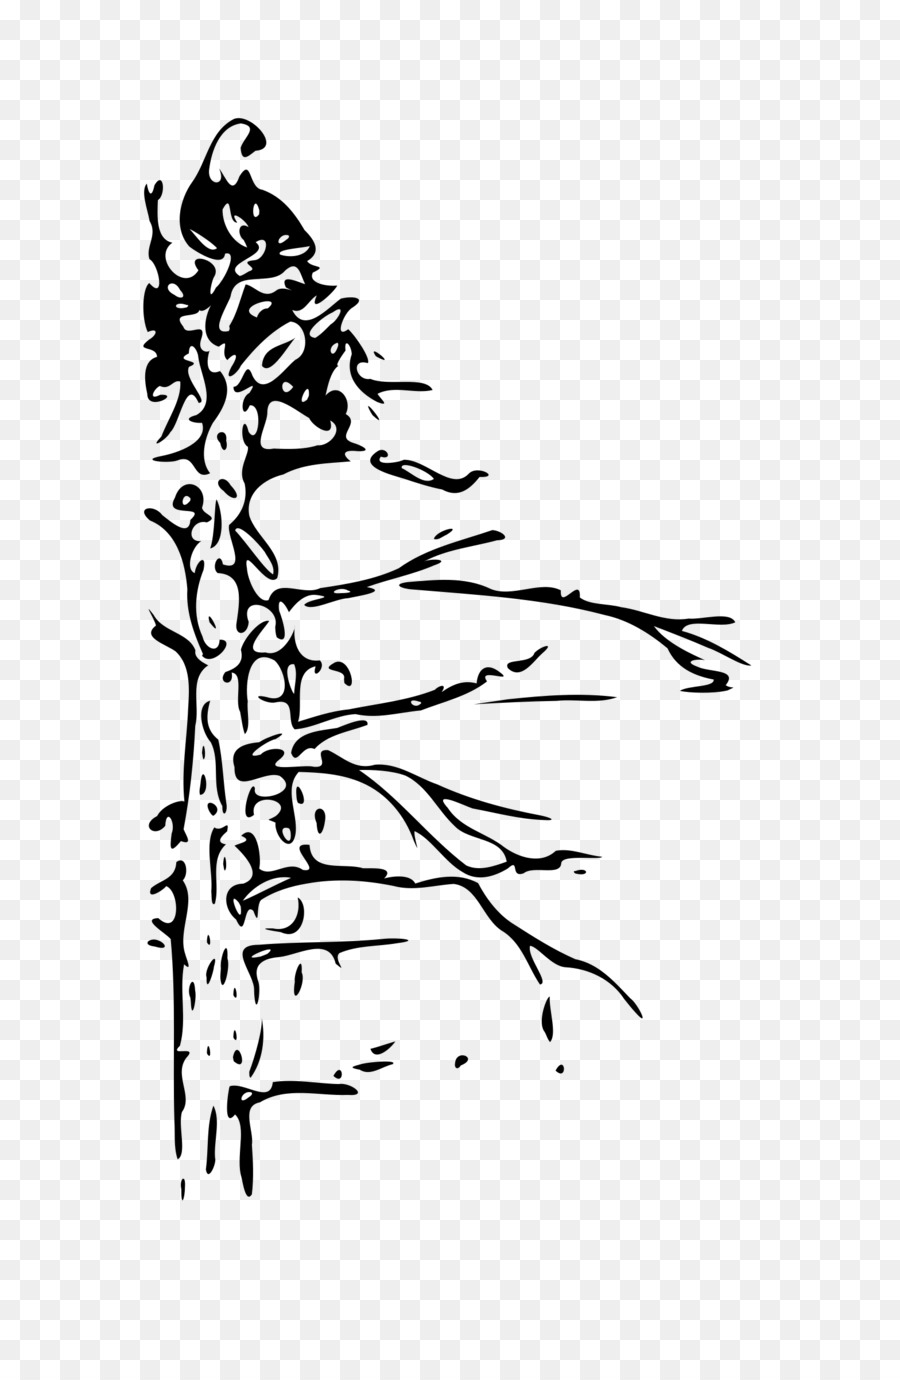 Tree Branch Silhouette png download - 1568*2400 - Free Transparent Bald  Eagle png Download. - CleanPNG / KissPNG